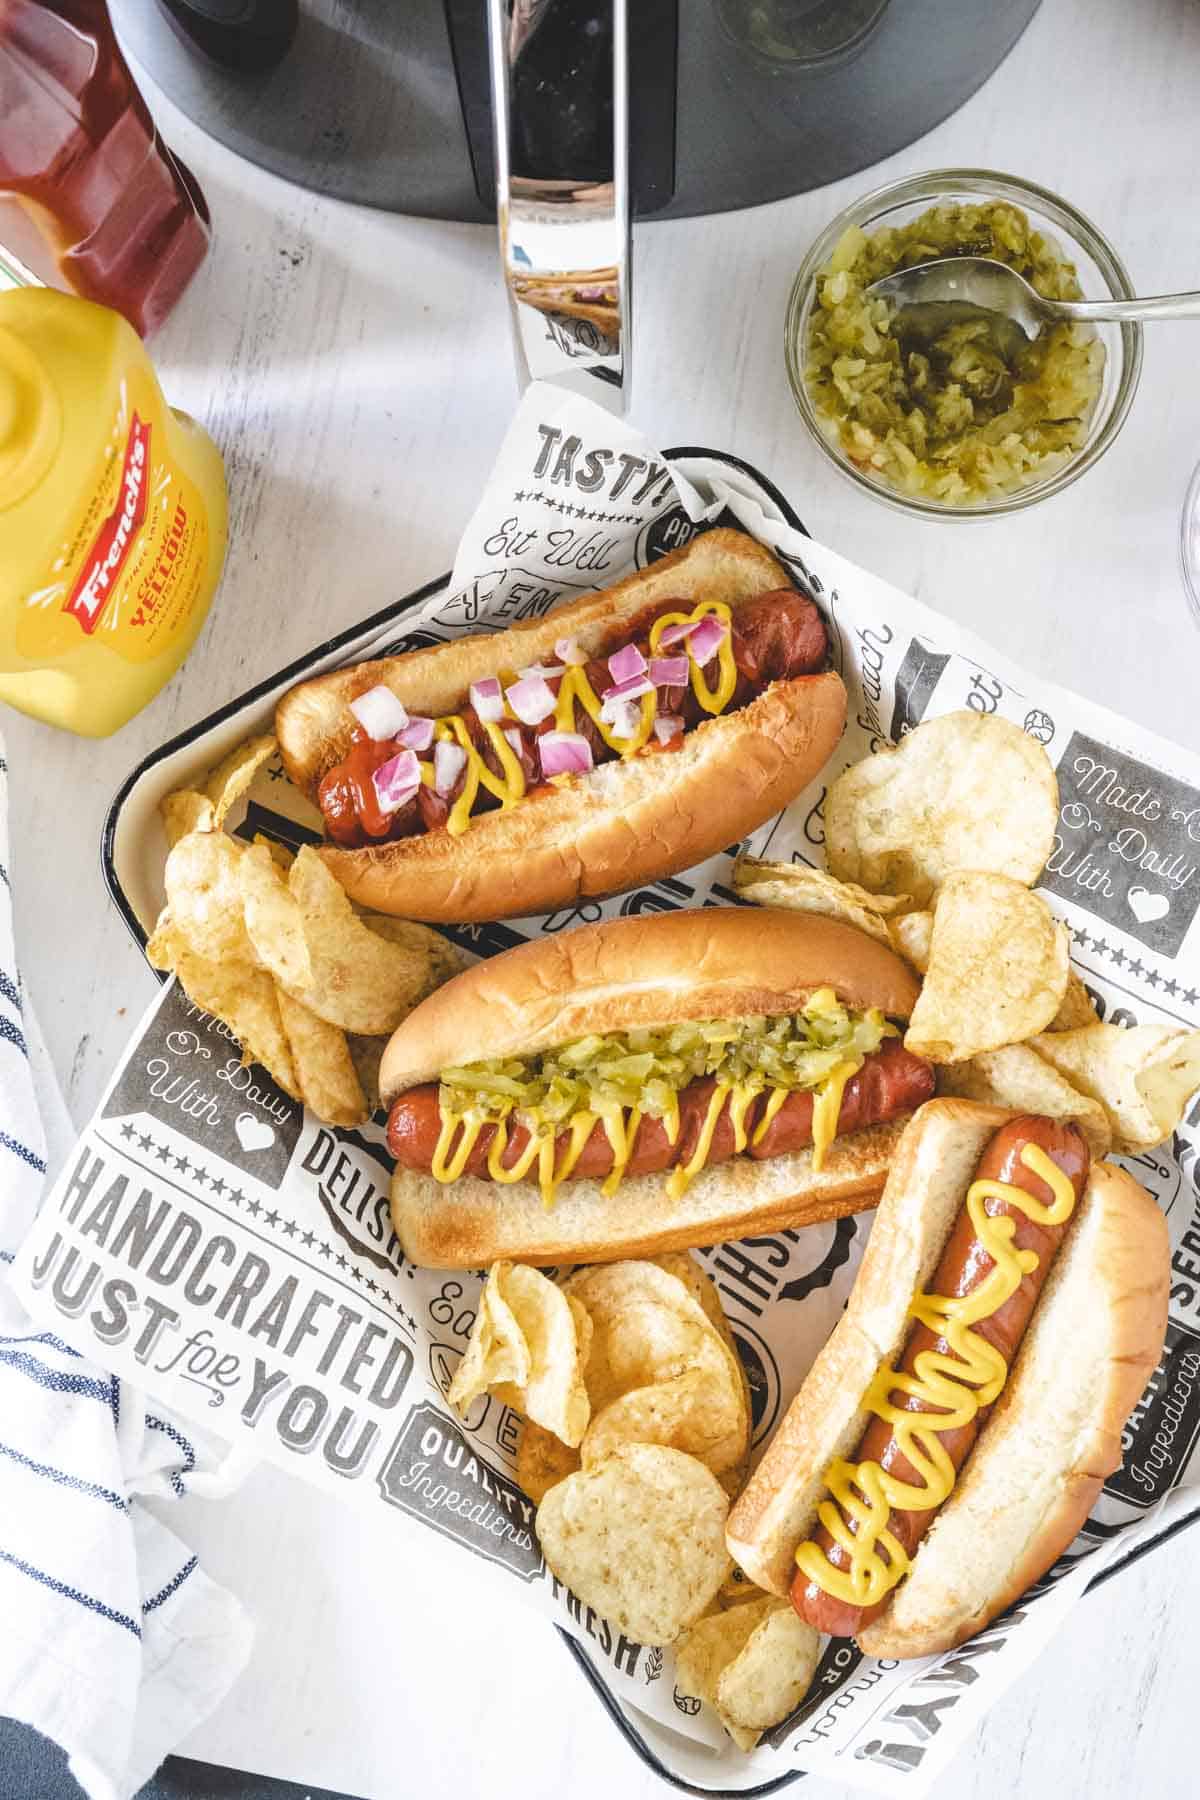 Three air fryer hot dogs in buns on a white tray surrounded by potato chips with pickled relish, mustard and ketchup set on the table.